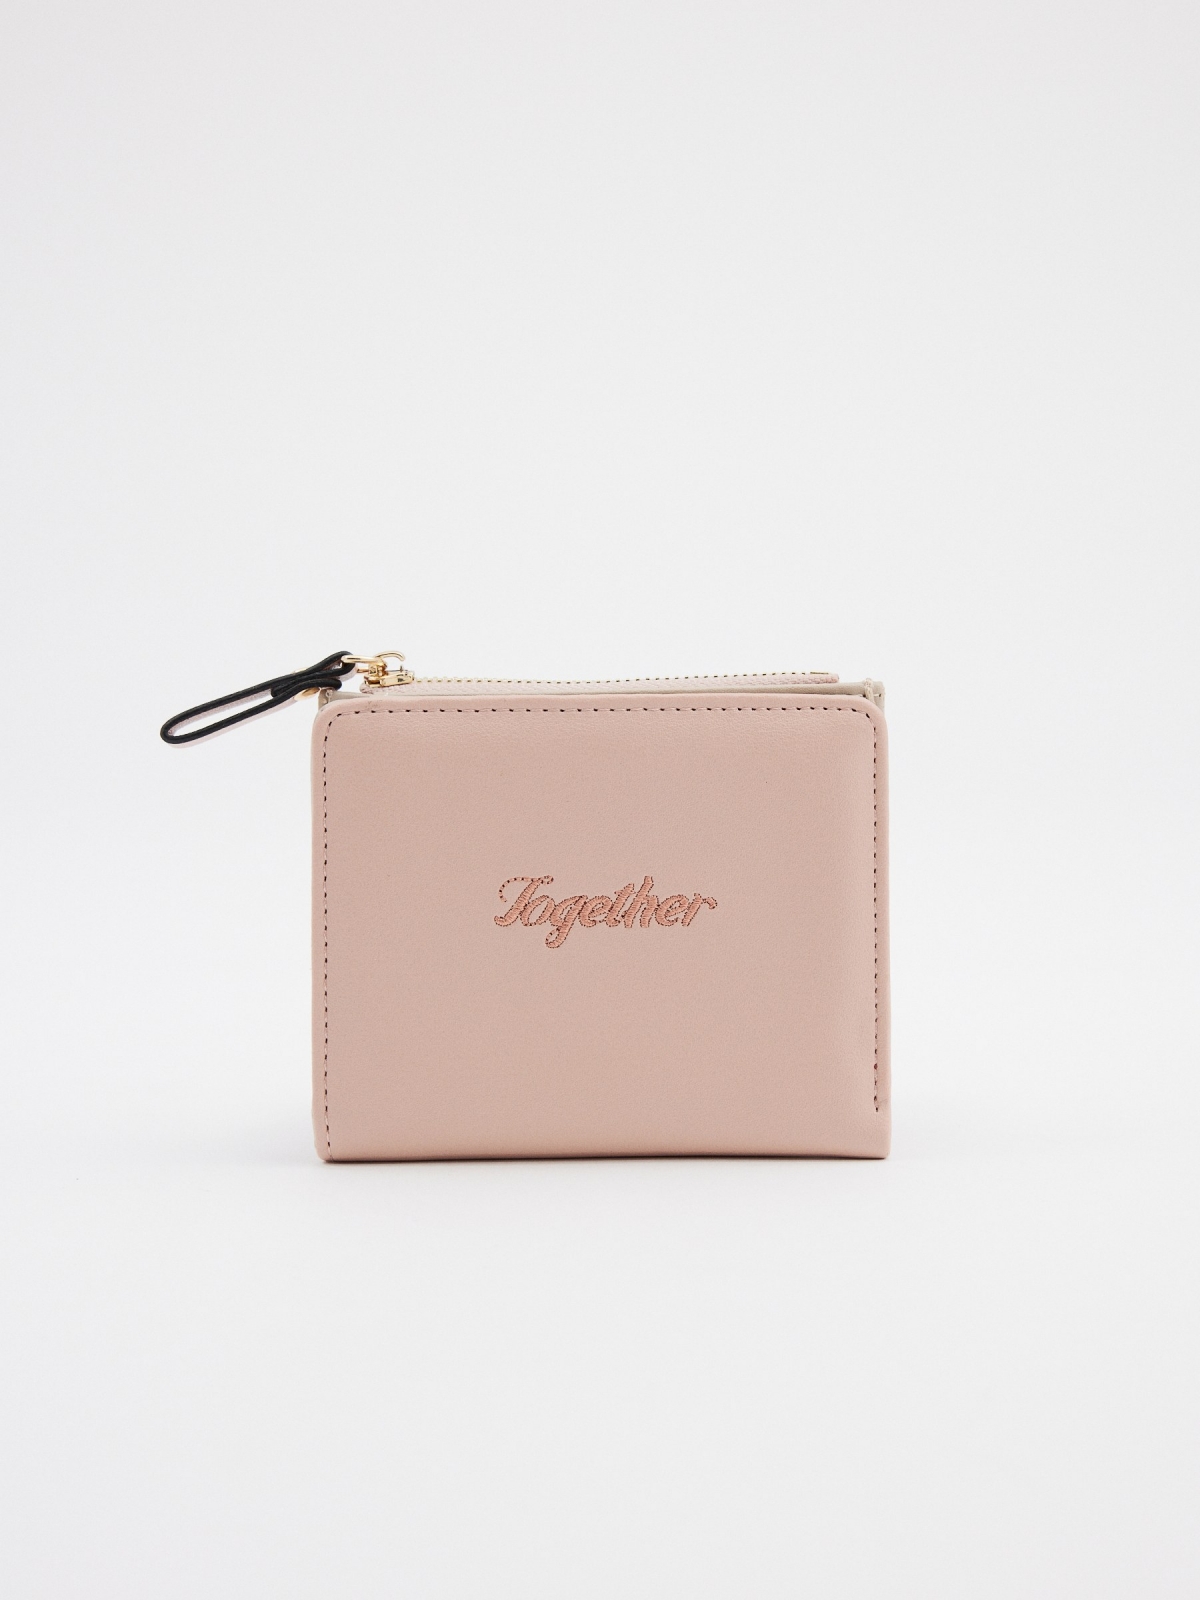 Embroidered pink wallet